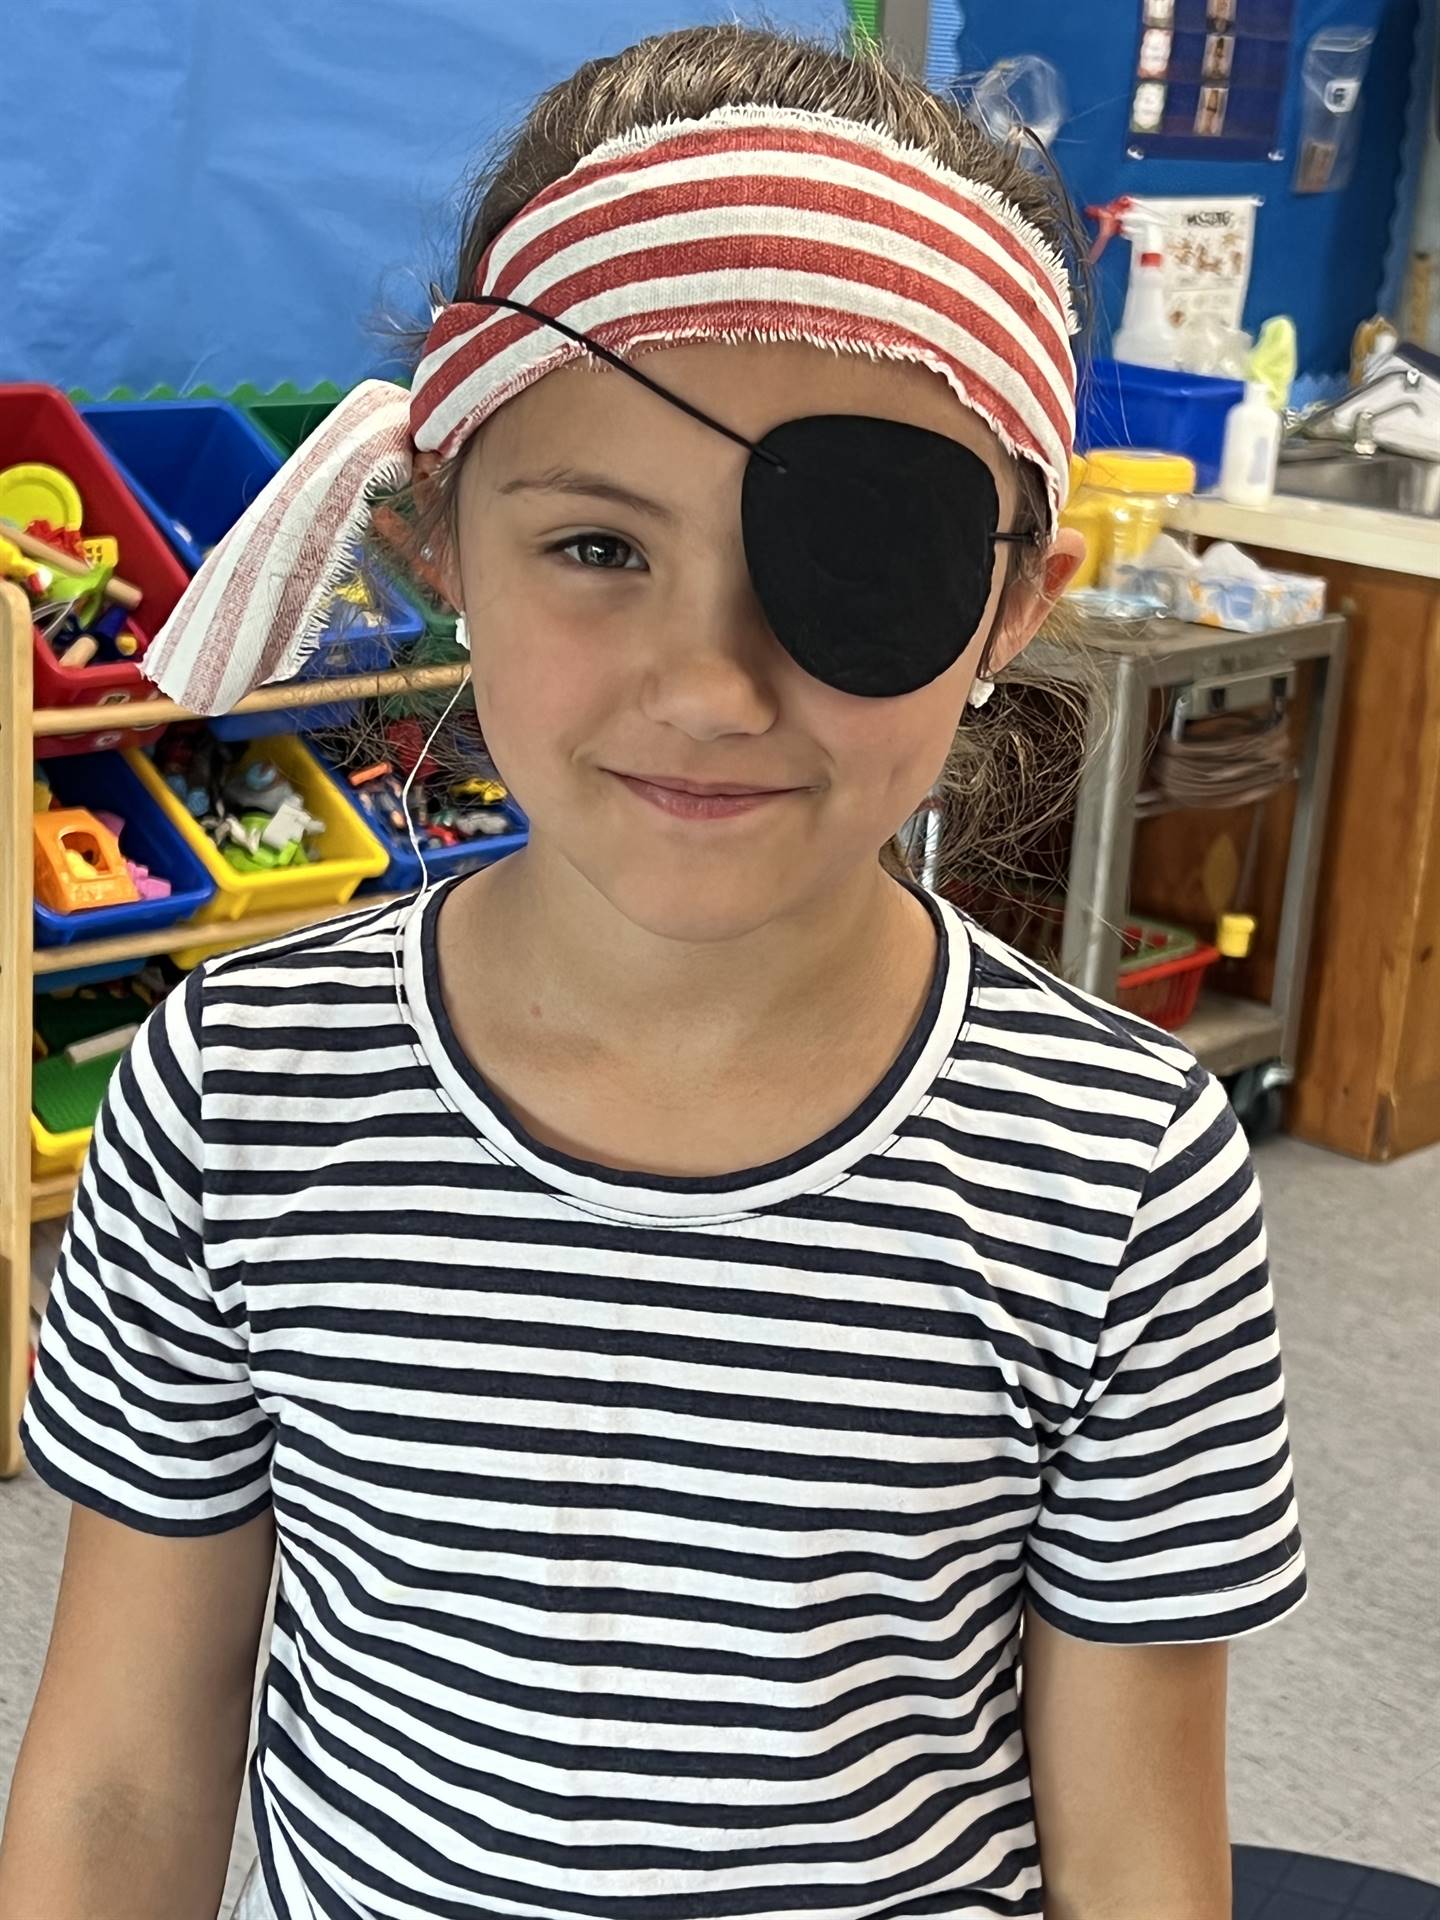 student dressed as pirate with eye patch and headband